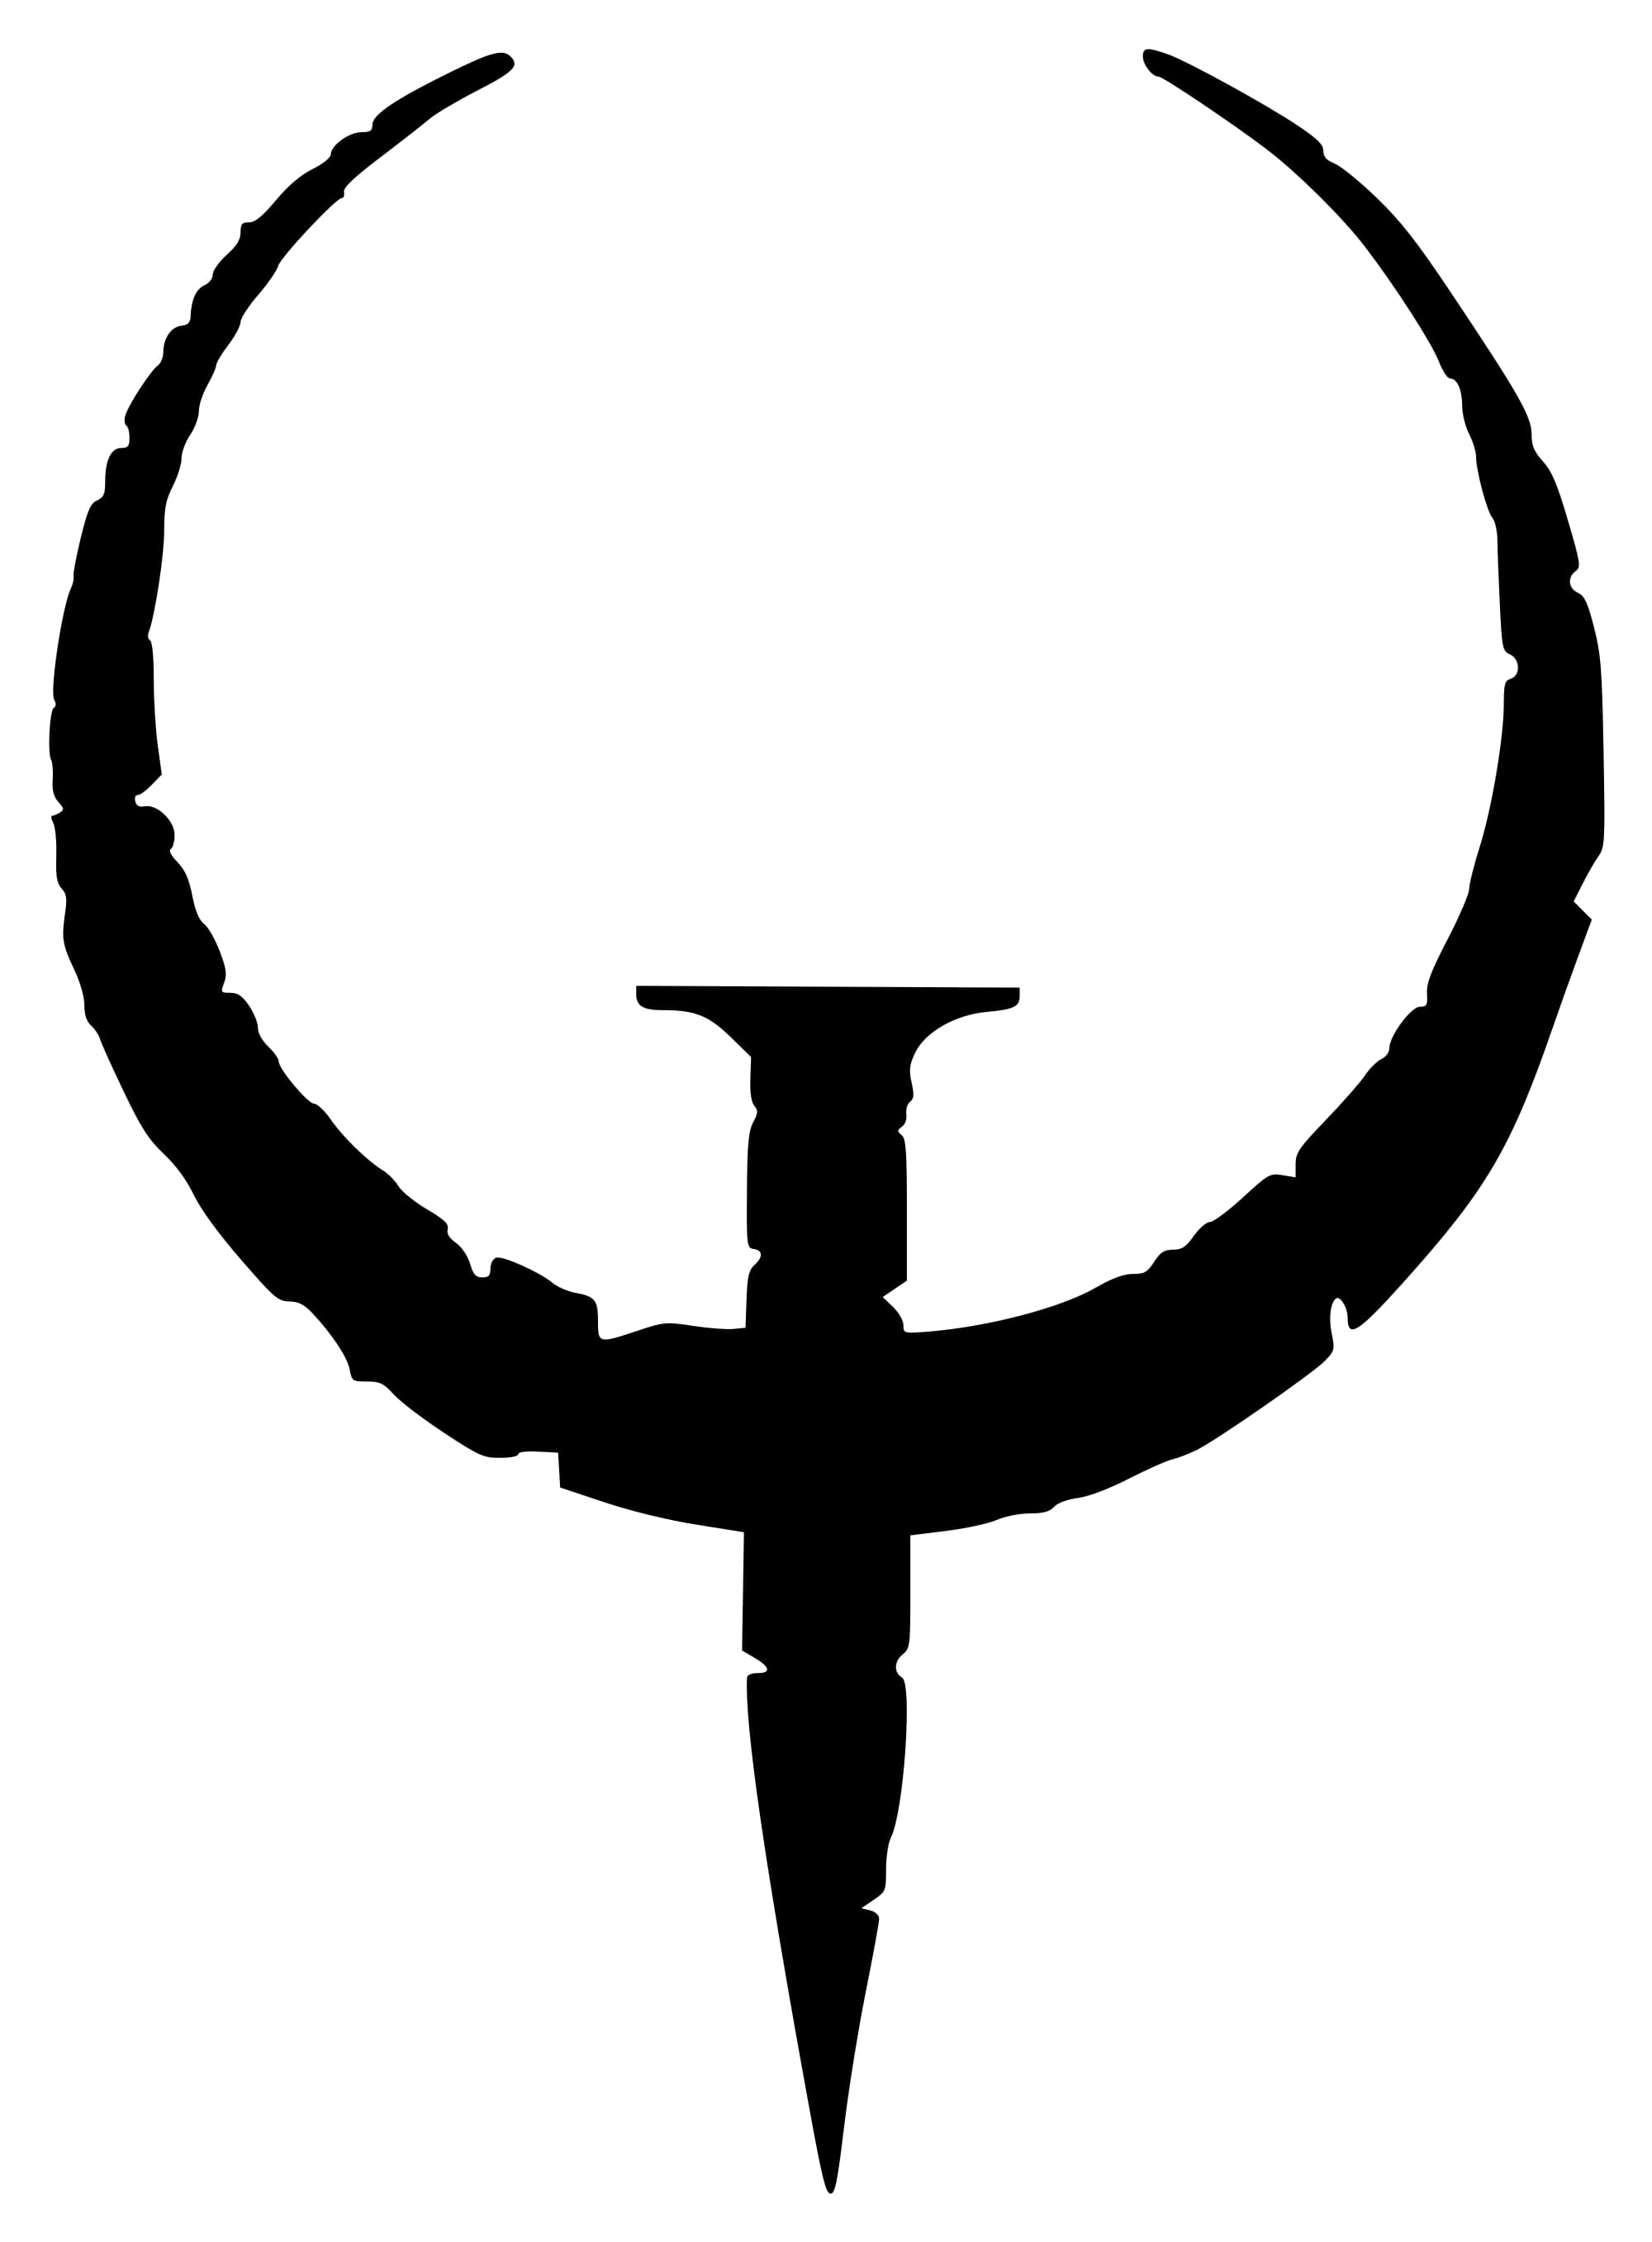 Quake logo and symbol, meaning, history, PNG